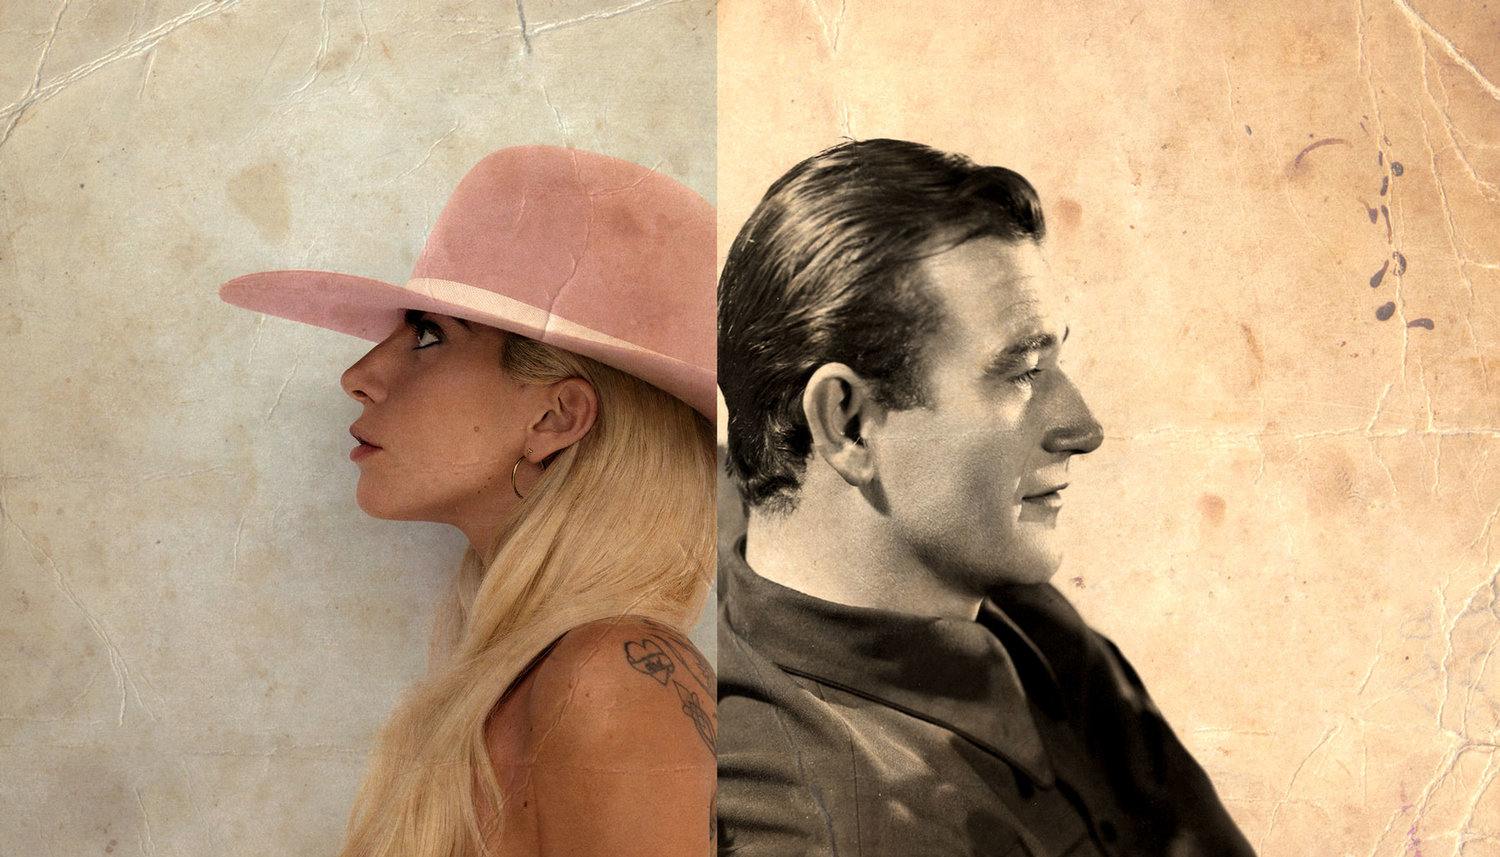 The cover of Lady Gaga’s album Joanne (2016), photo courtesy of Interscope Records. An image of John Wayne from the 1930’s, photo courtesy of John Wayne Enterprises.